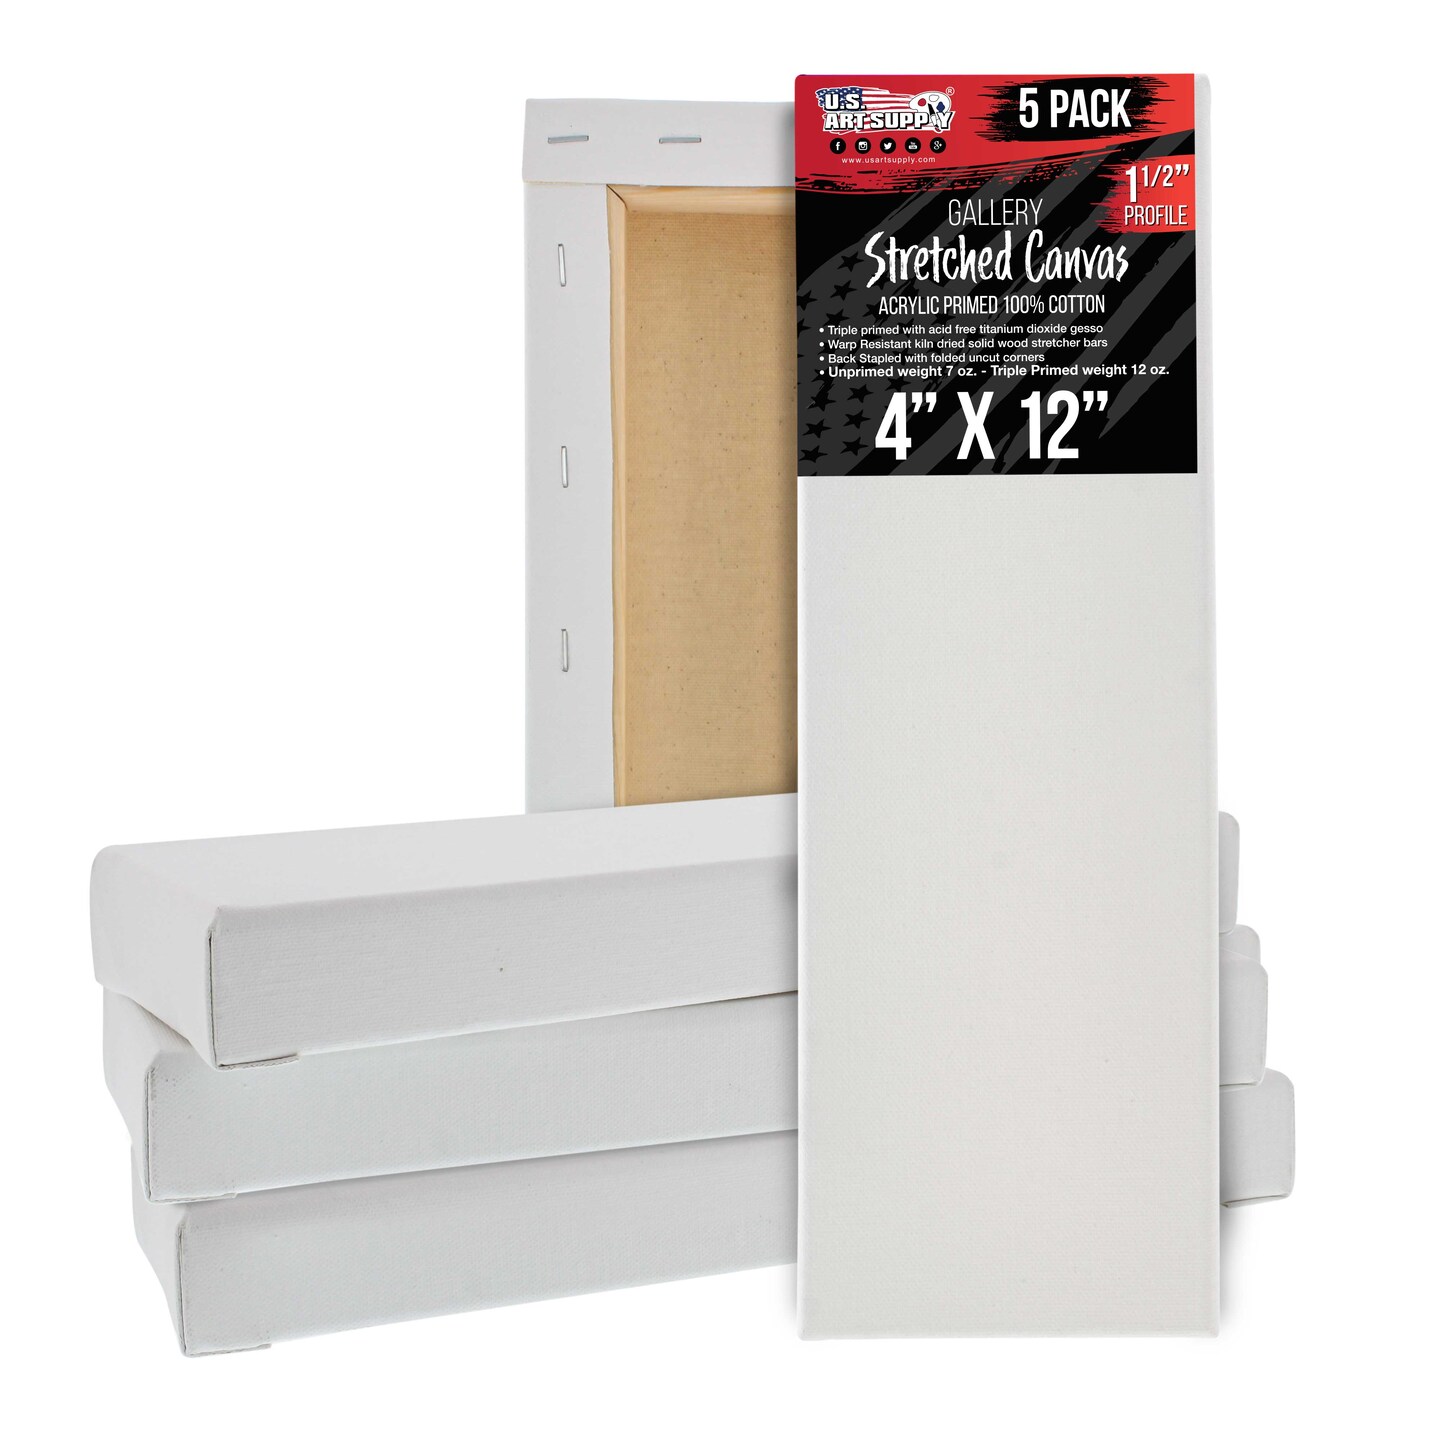 Arteza Blank Pre Stretched Canvas for Painting, 36x48, Pack of 2, Primed, 100%